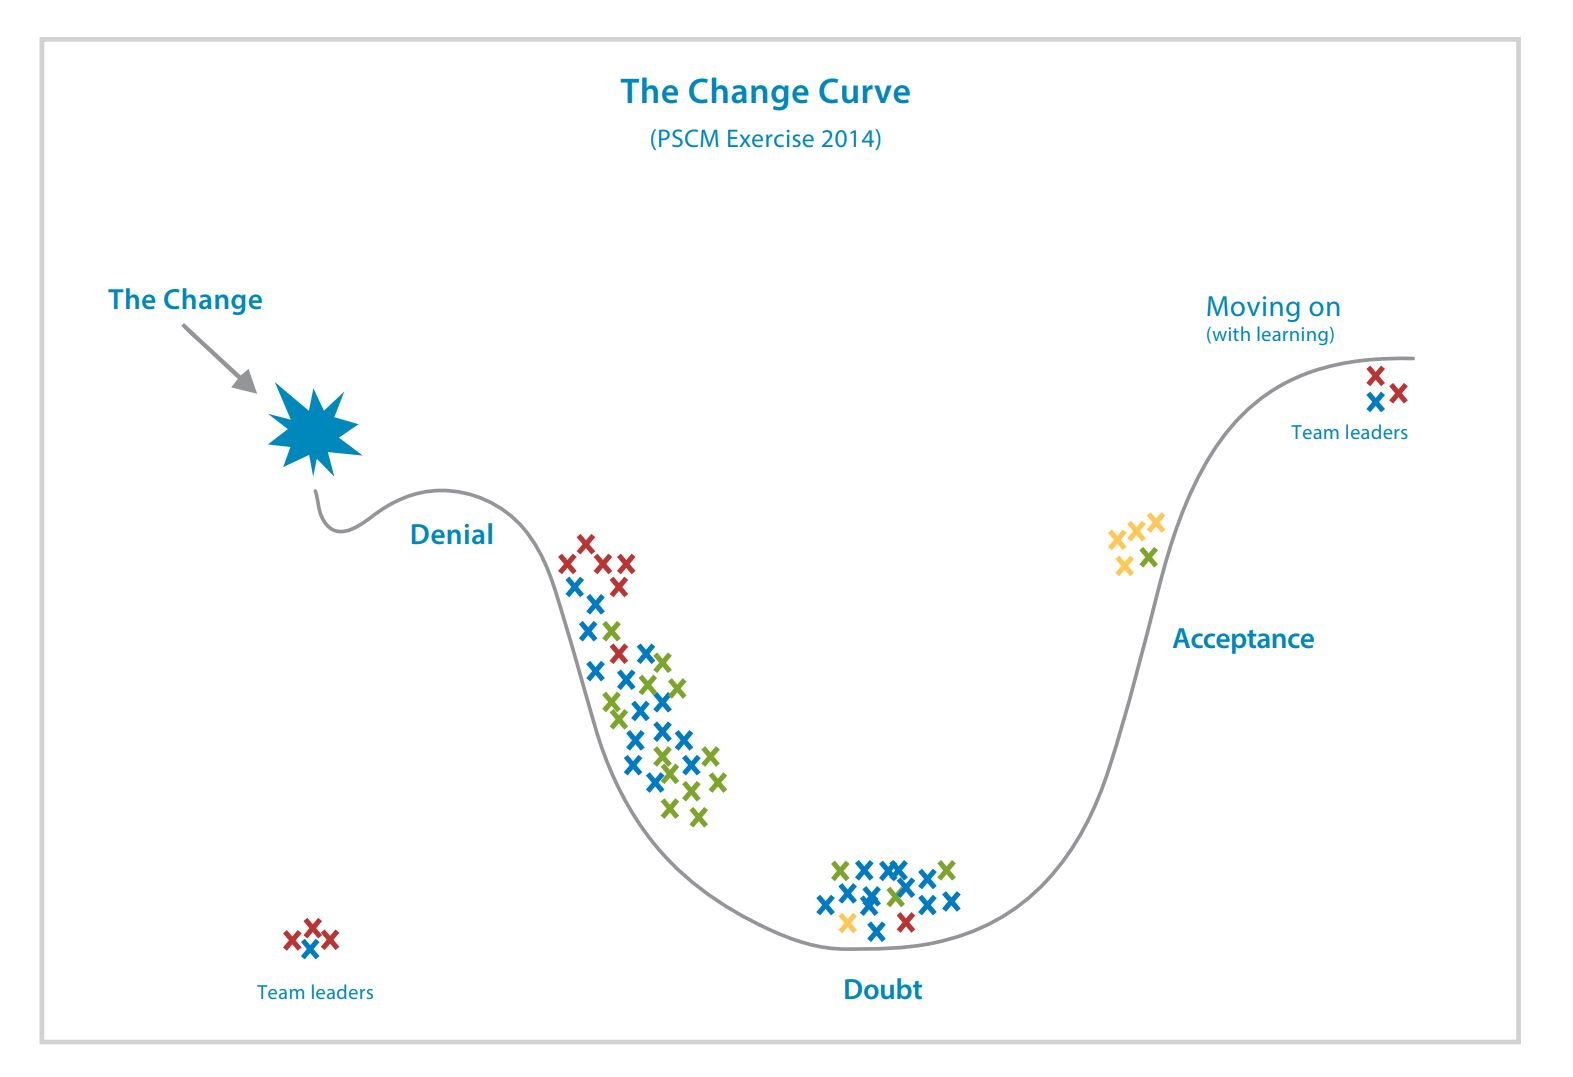 The change curve